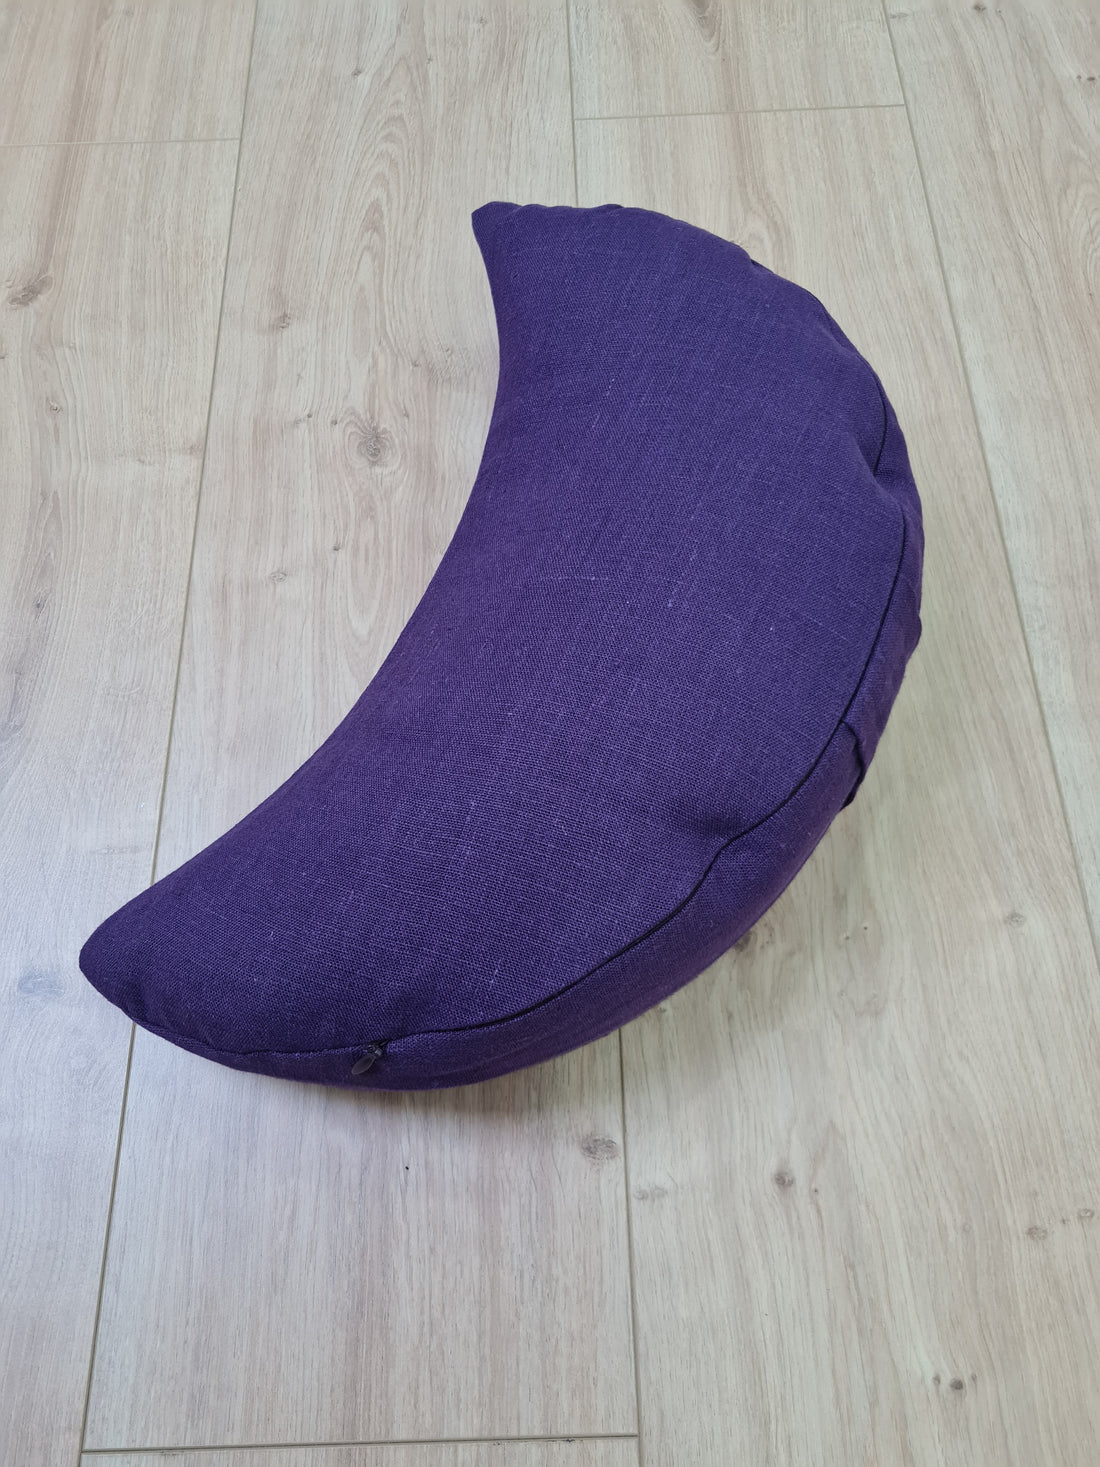 Purple linen meditation Crescent cushion filled with buckwheat hulls gift for him Yoga support pillow